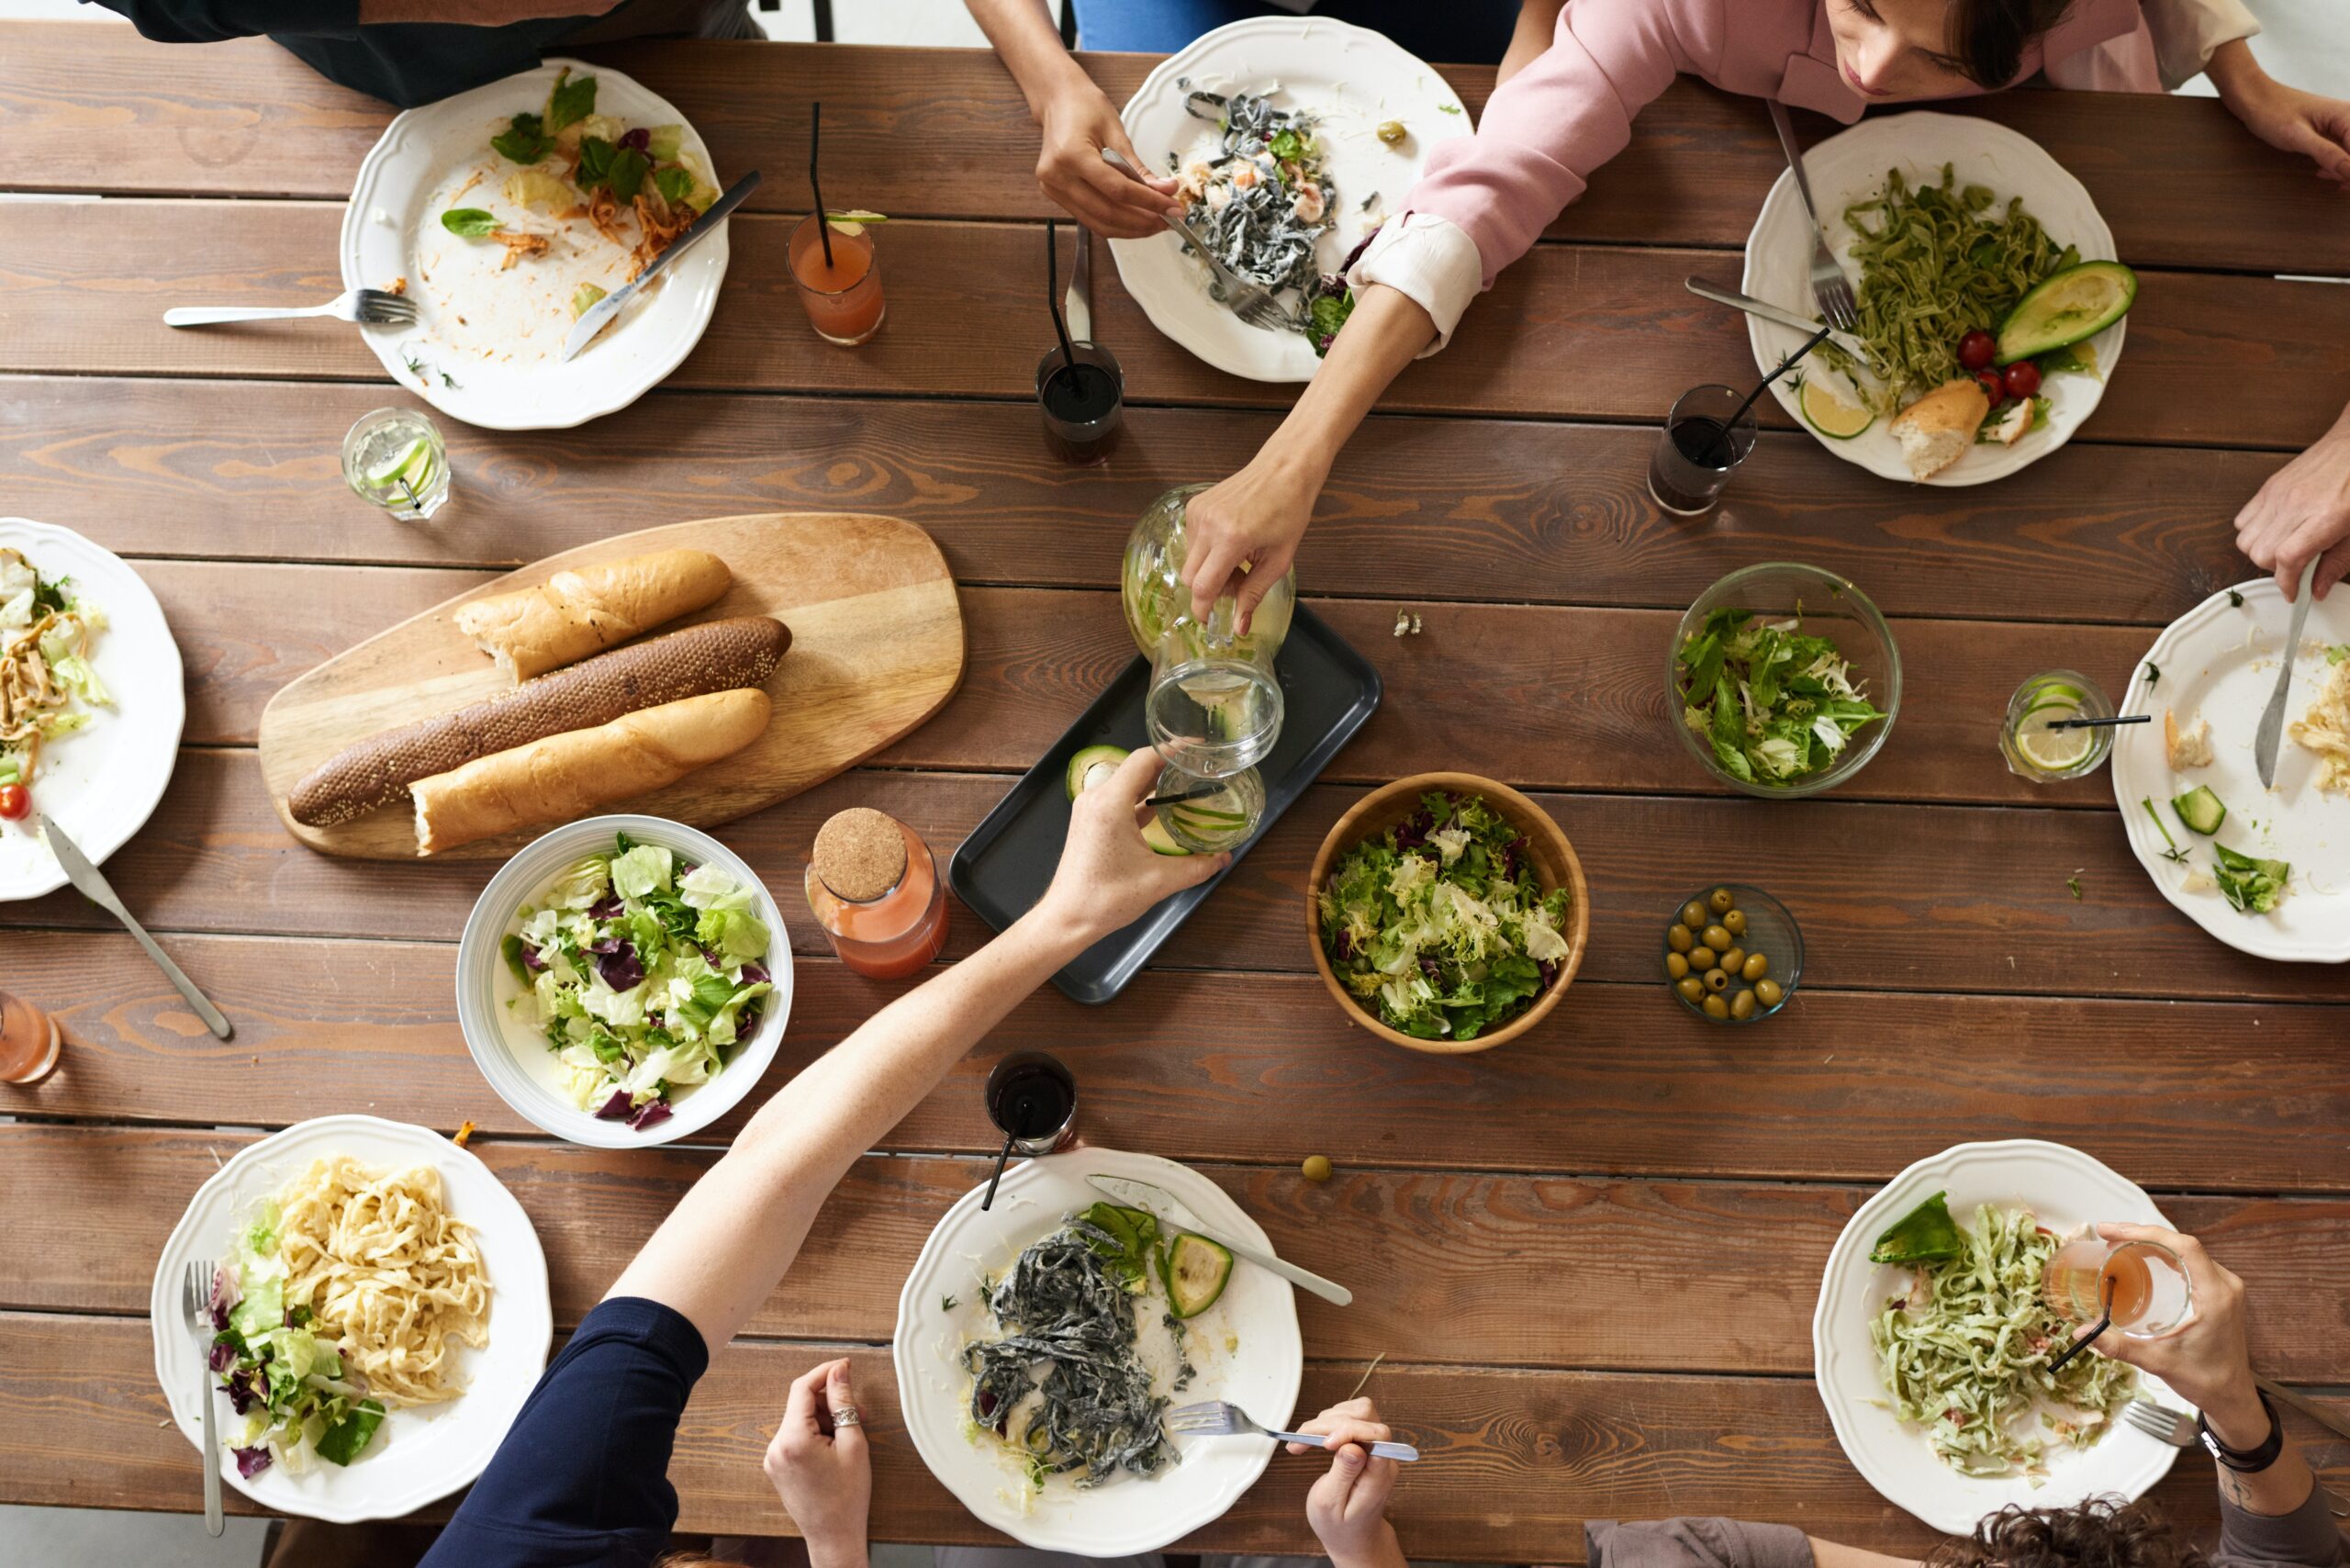 A group of people enjoying a variety of dishes at a communal table from an overhead perspective.